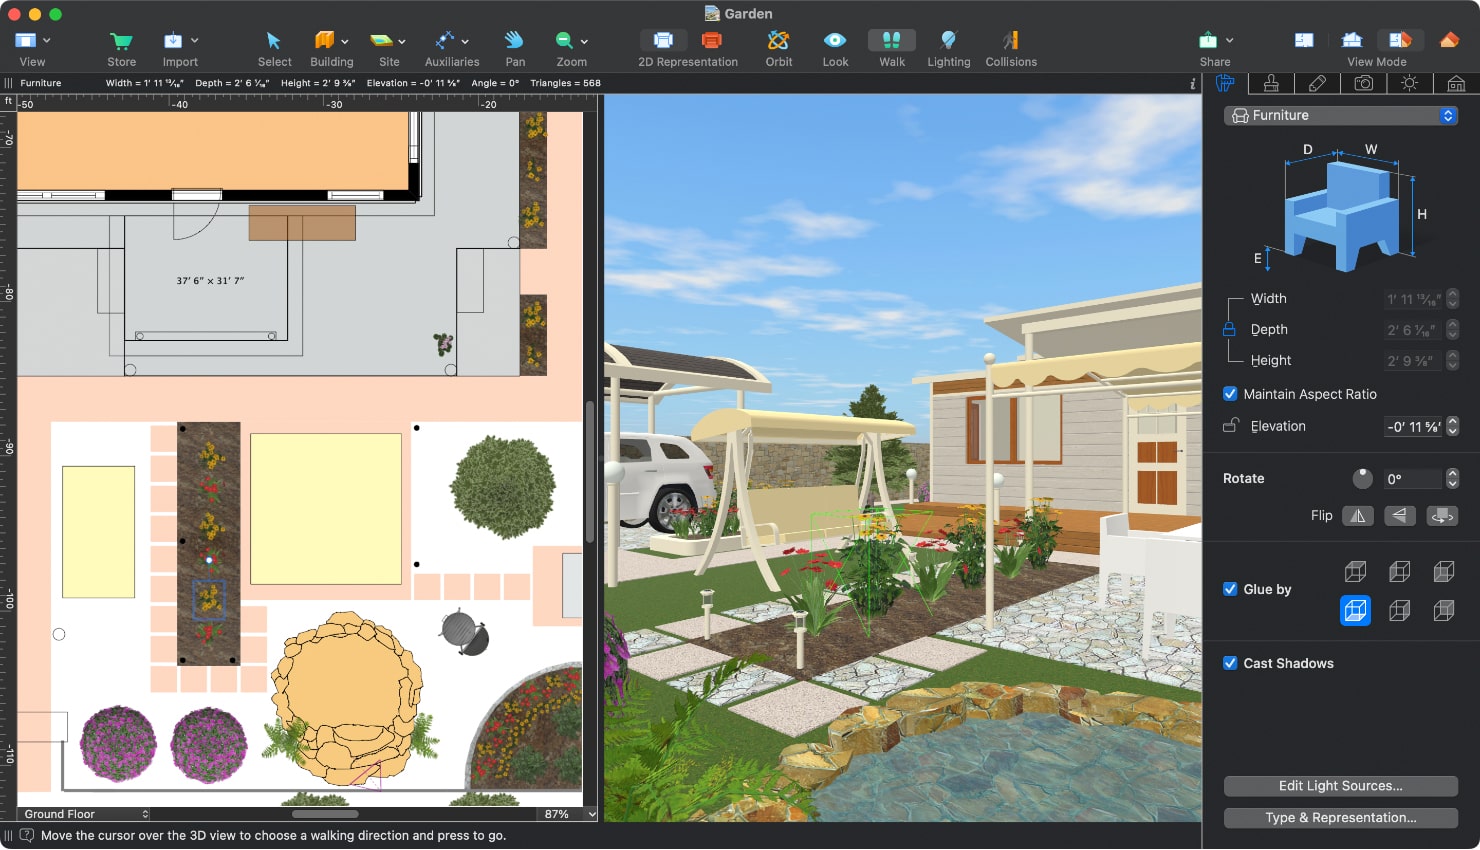 A screenshot of a garden design opened in the split-mode in Live Home 3D for Mac